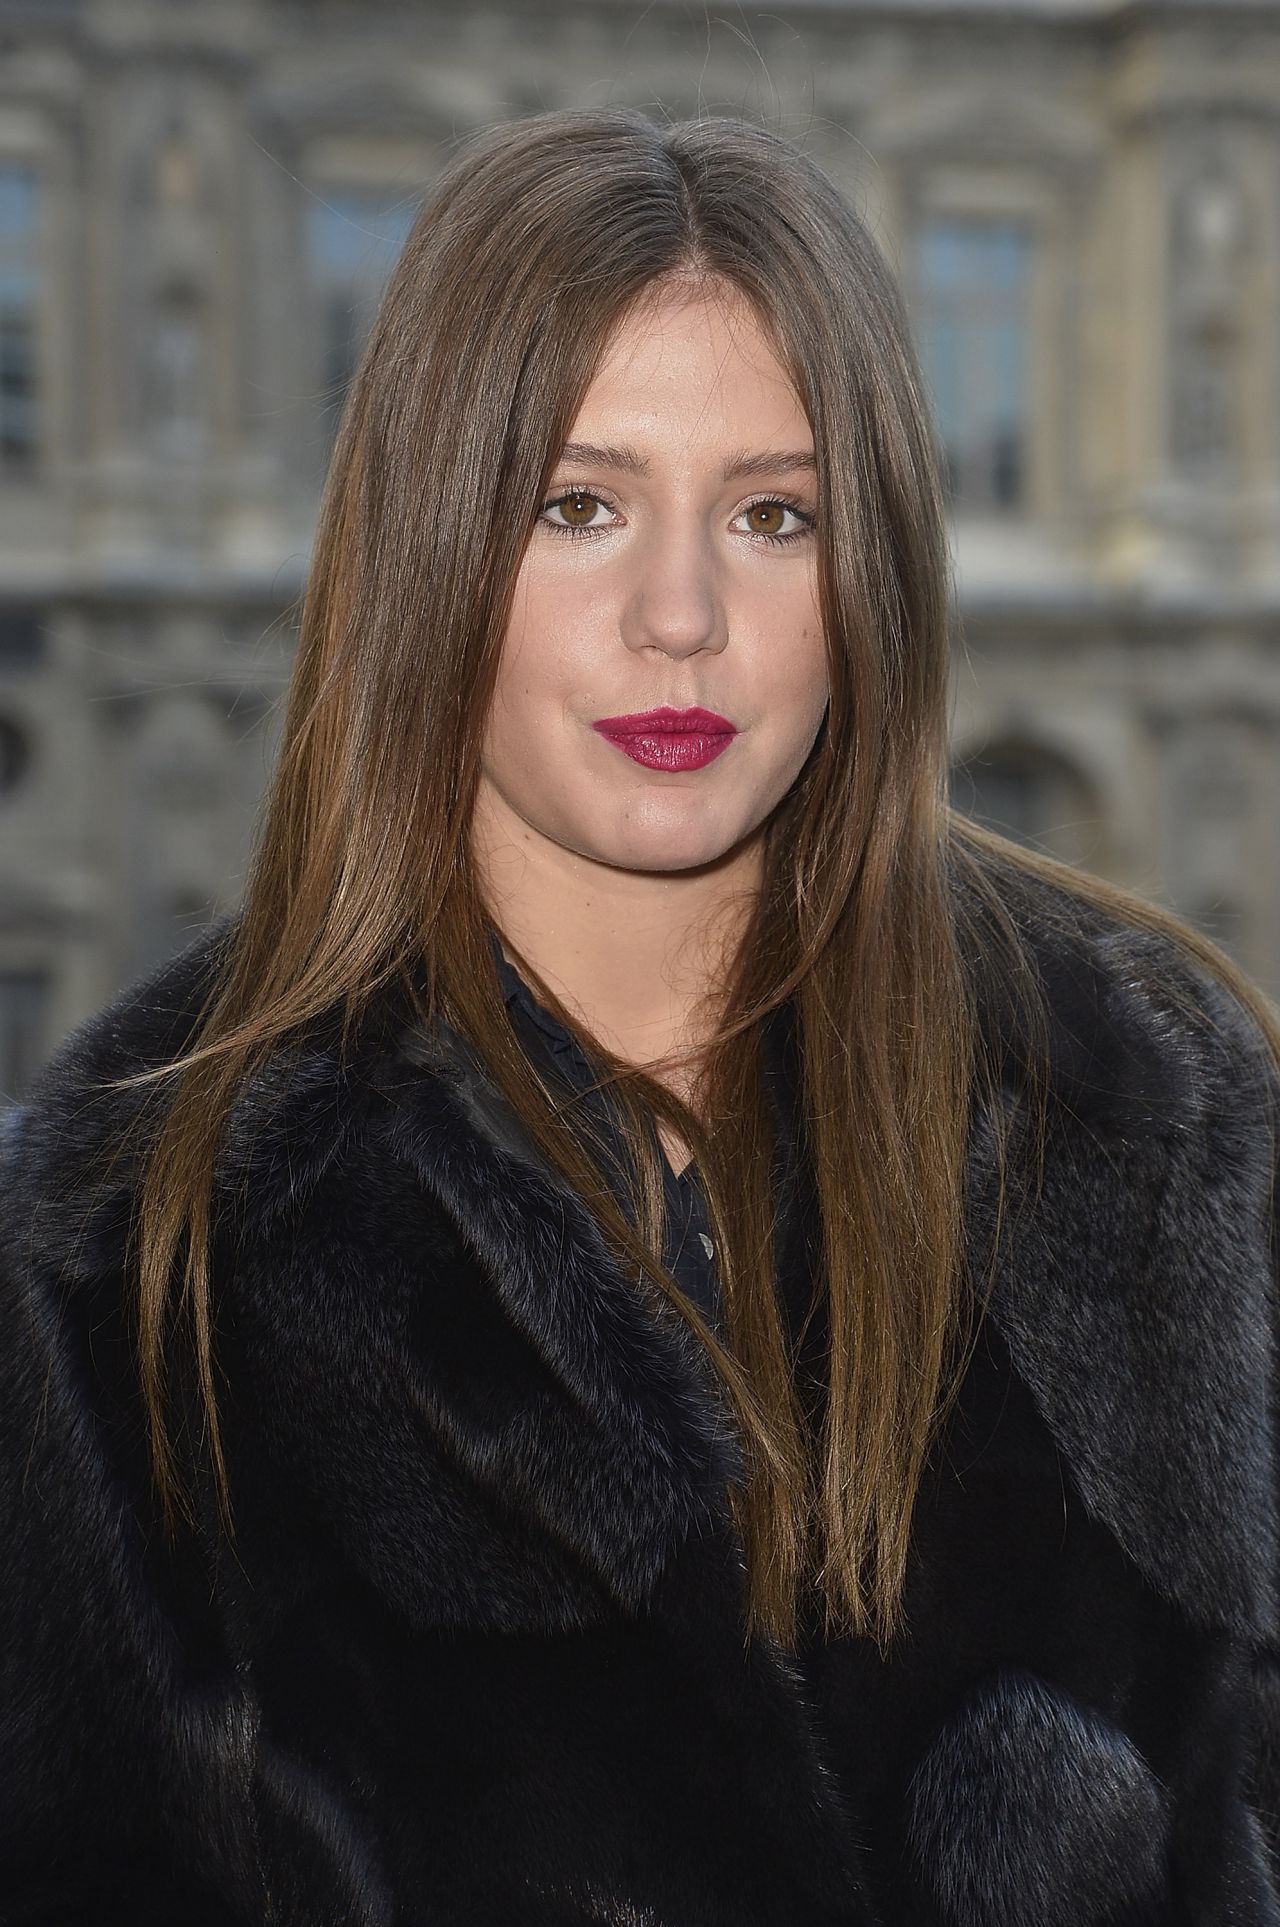 Louis Vuitton on X: French Actress Adele Exarchopoulos in #LouisVuitton at  the 2014 National Board Of Review Awards Gala.  / X